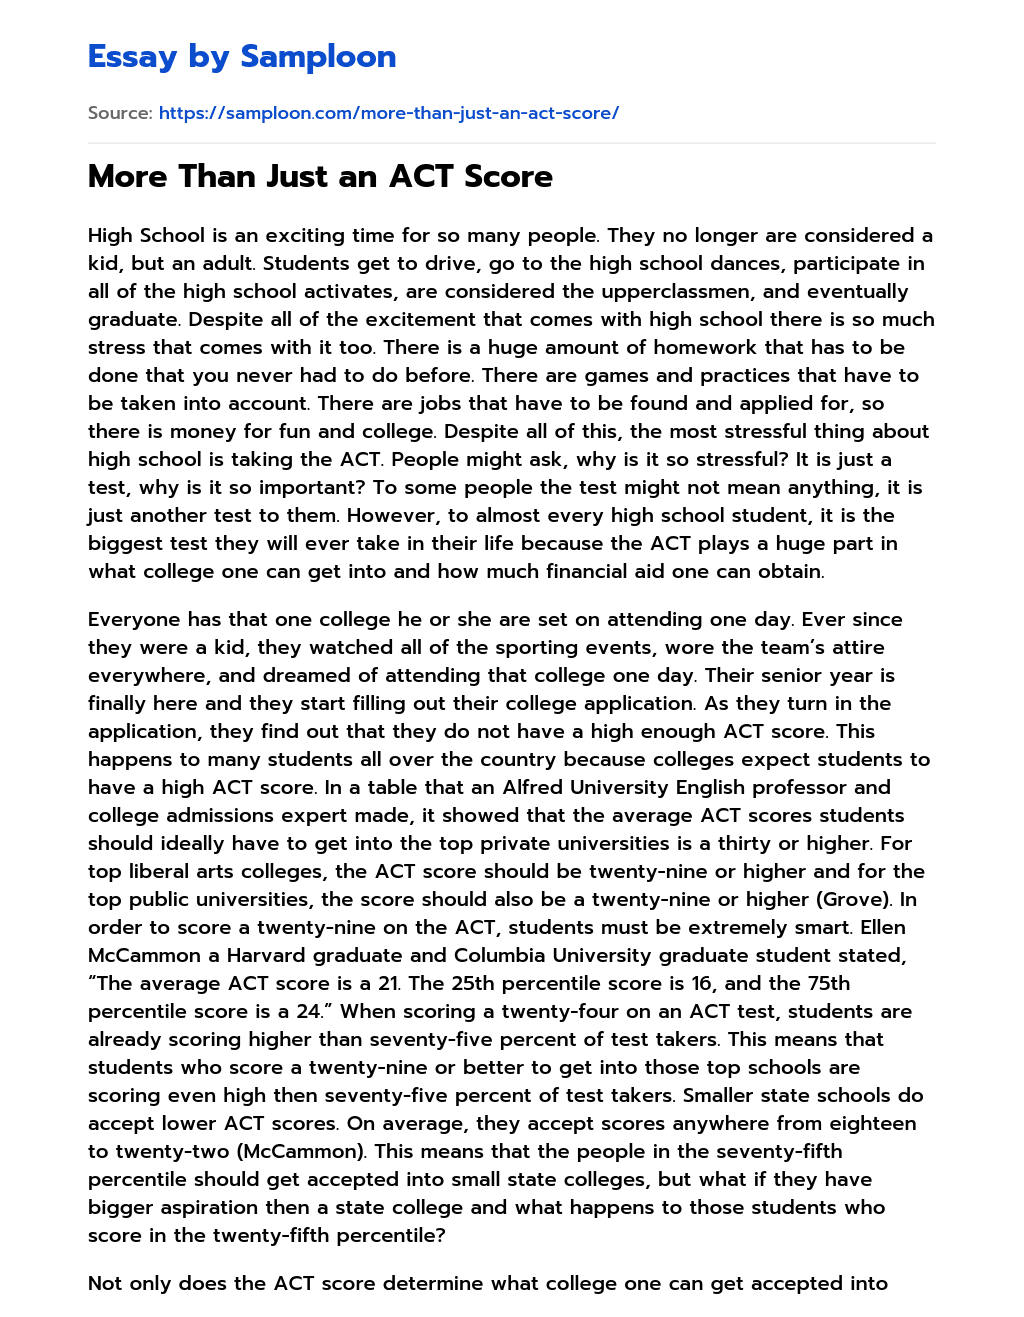 More Than Just an ACT Score essay